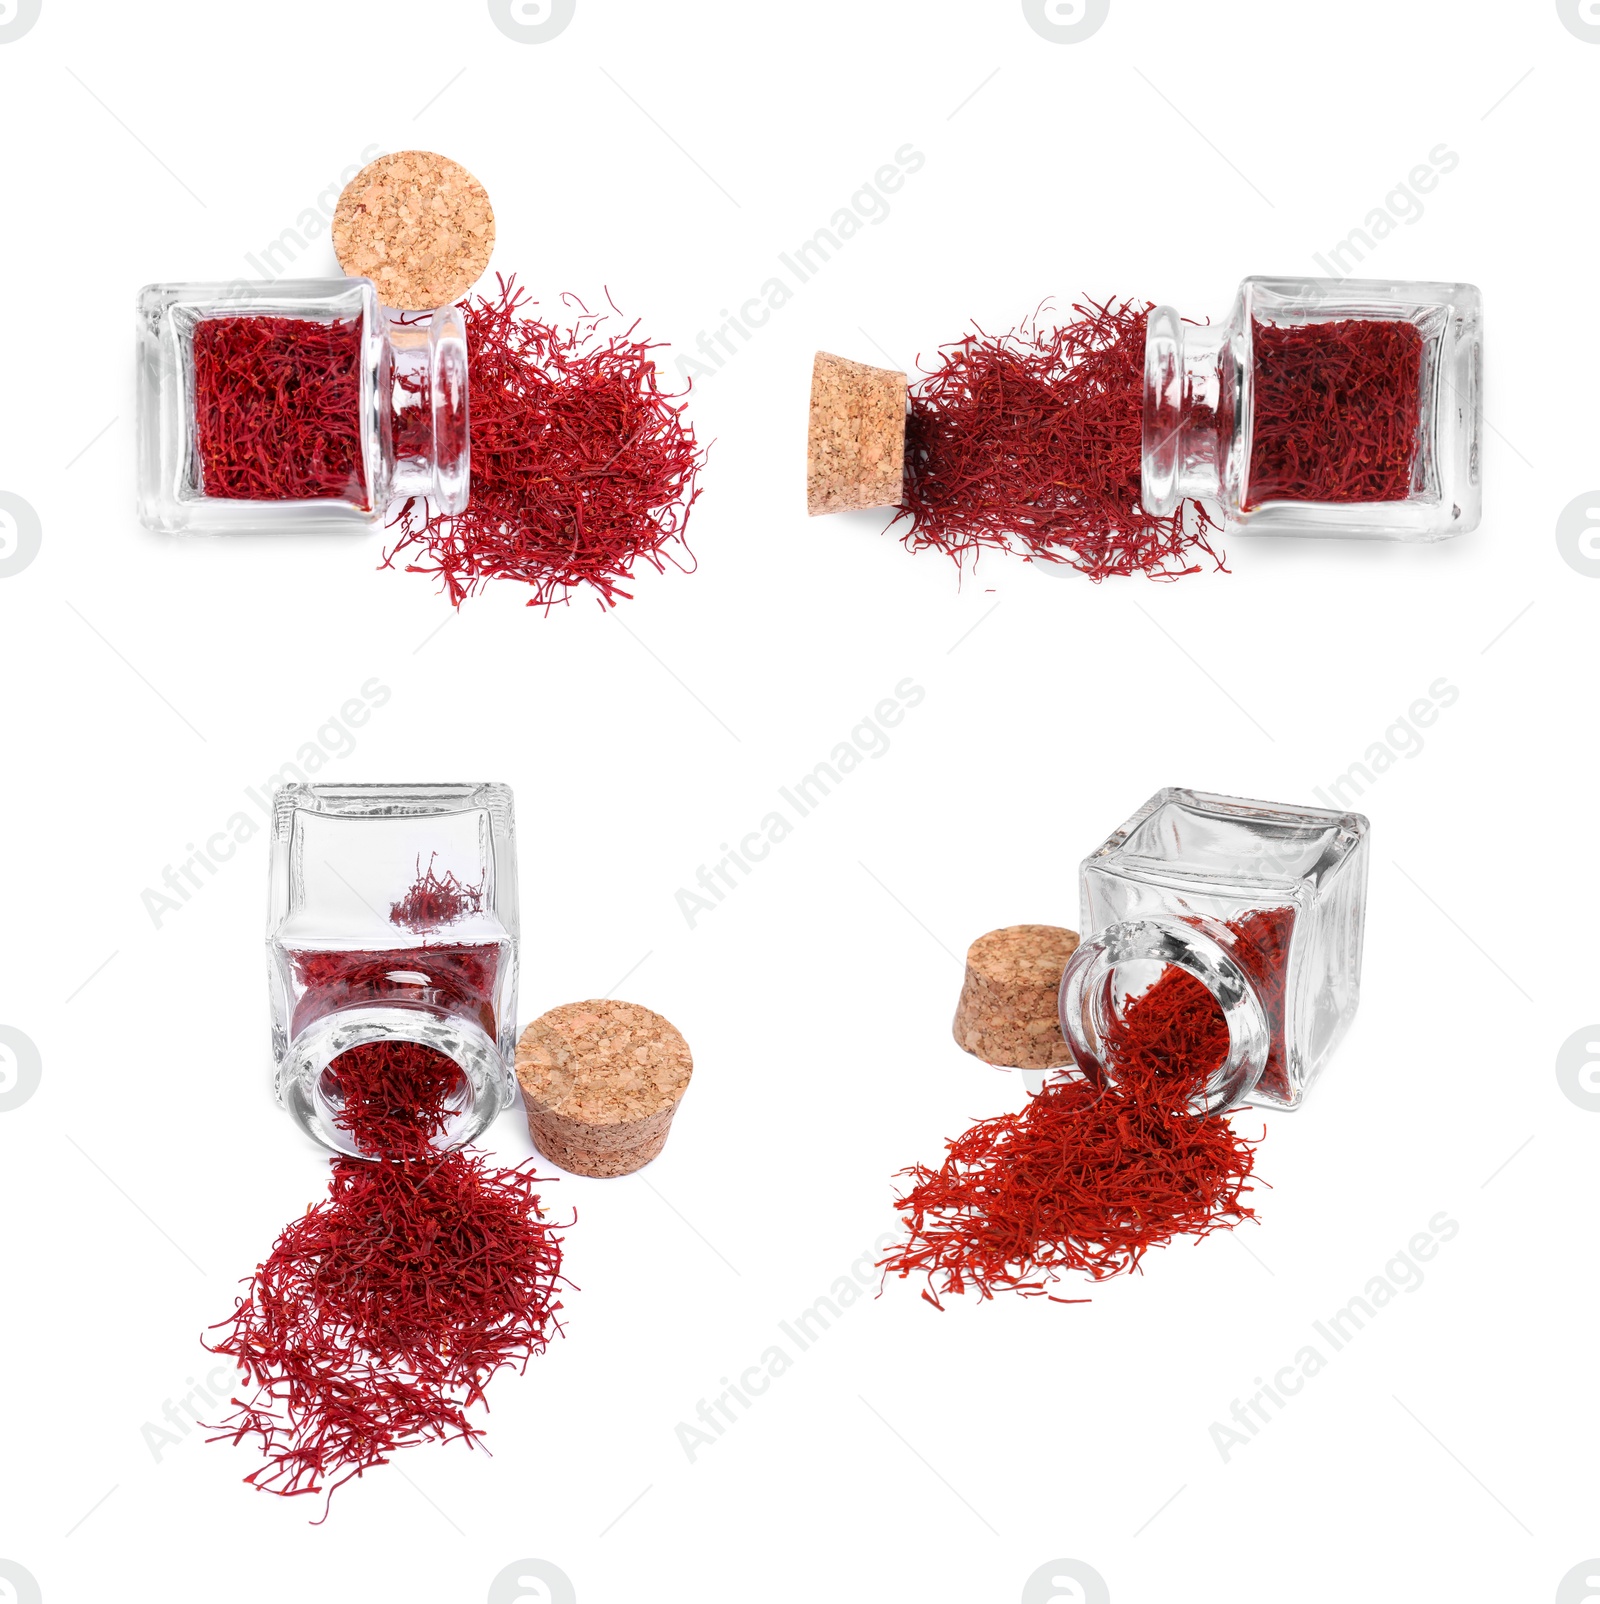 Image of Aromatic saffron and glass jars isolated on white, top and side views